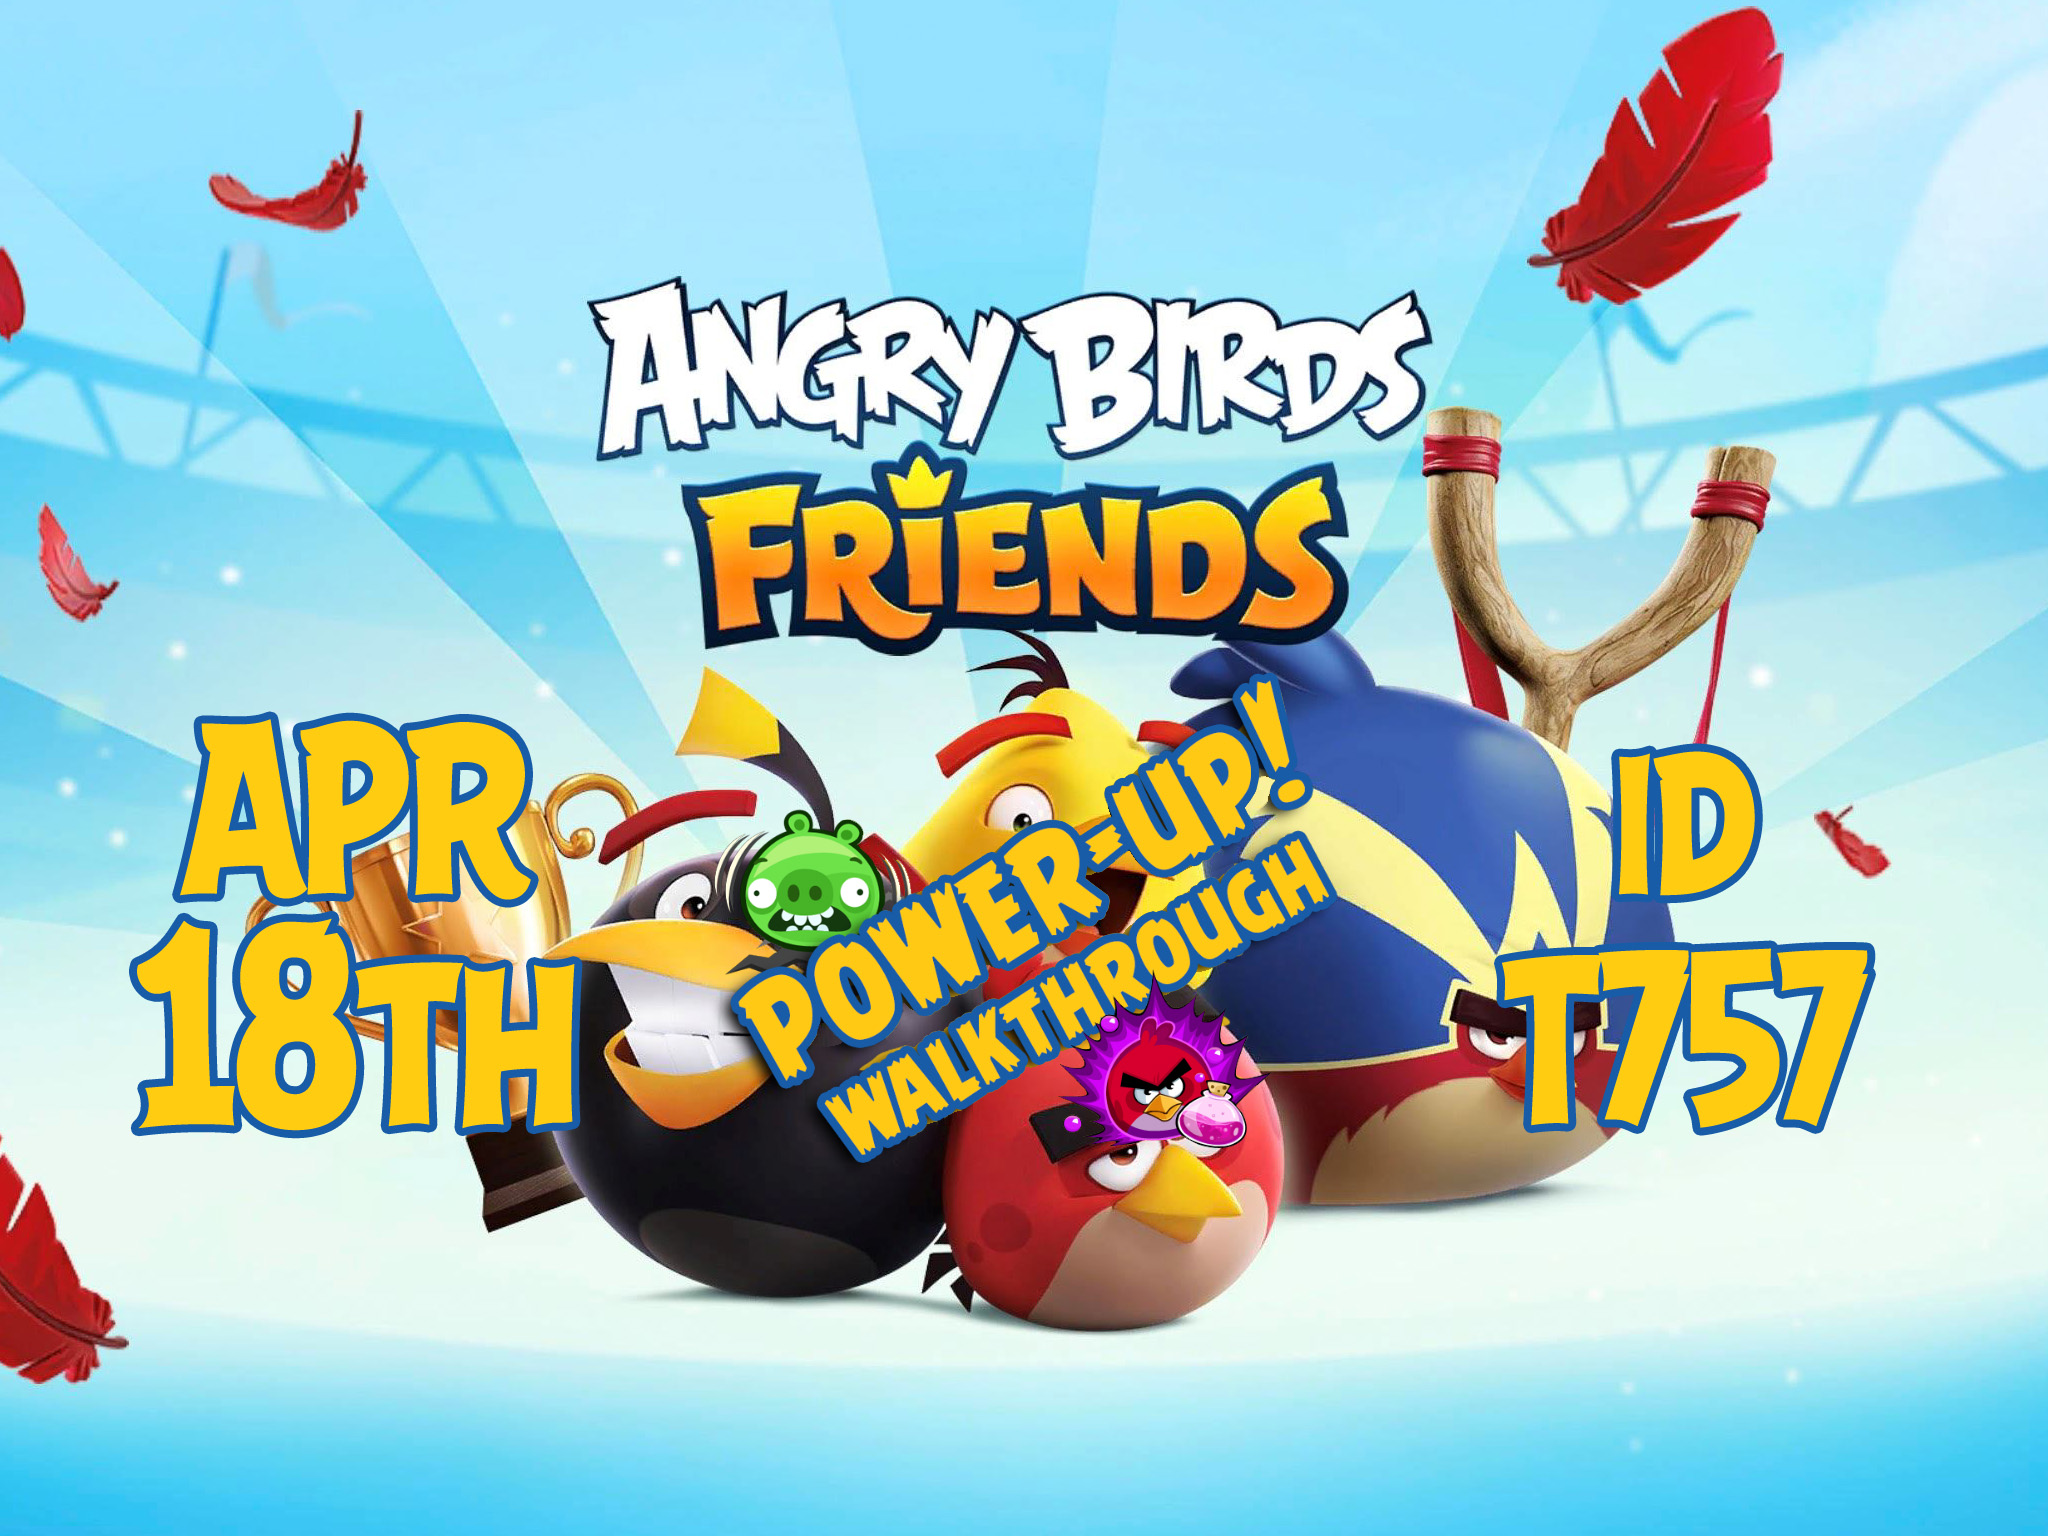 Angry-Birds-Friends-Tournament-T757-Feature-Image-PU